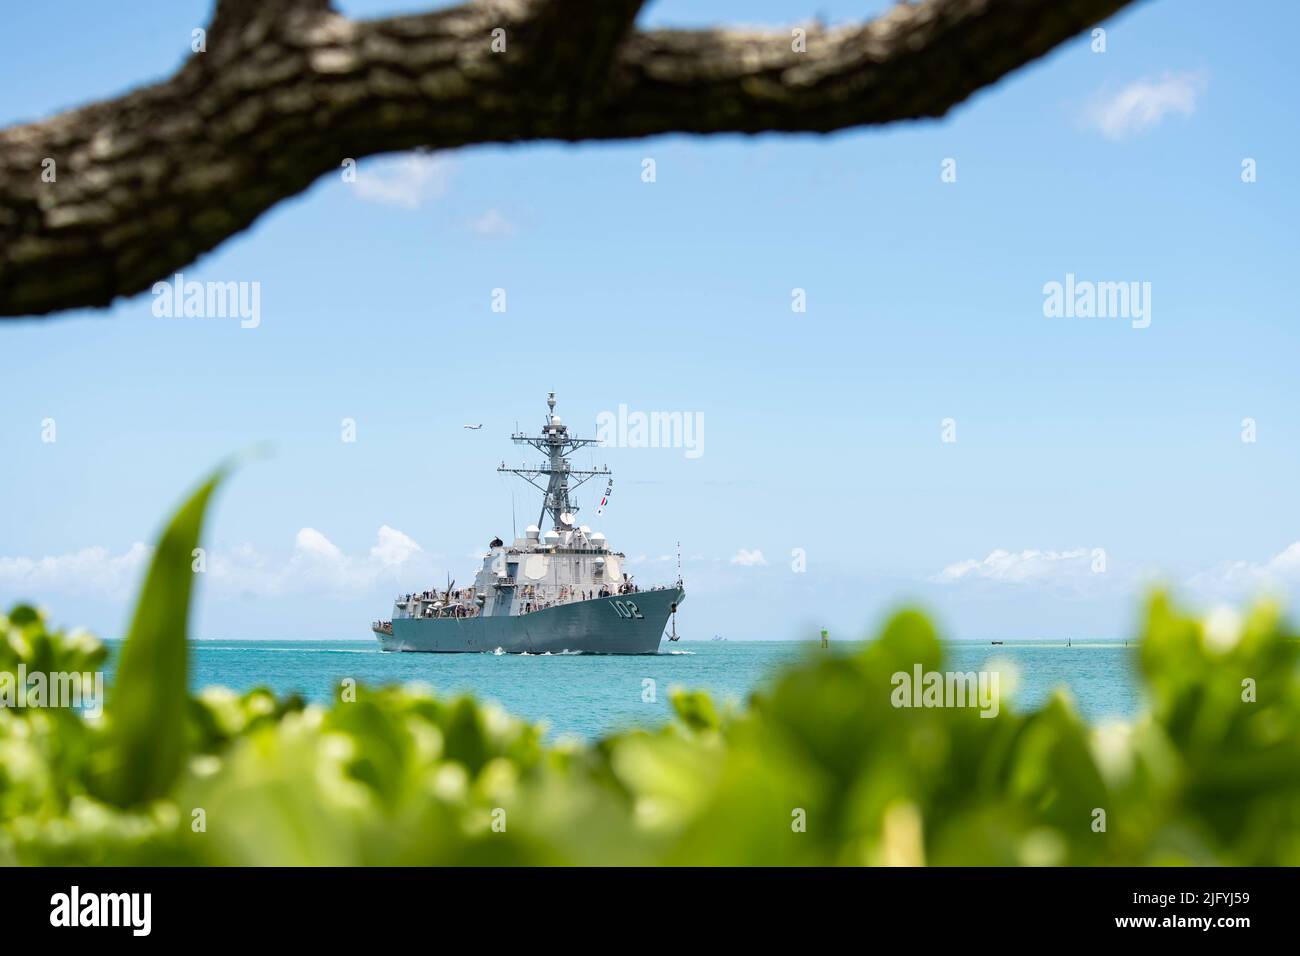 June 28, 2022 - Joint Base Pearl Harbor-Hickam, Hawaii, USA - Arleigh Burke-class guided-missile destroyer USS Sampson (DDG 102) arrives at Joint Base Pearl Harbor-Hickam to participate in Rim of the Pacific (RIMPAC) 2022, June 28. Twenty-six nations, 38 ships, four submarines, more than 170 aircraft and 25,000 personnel are participating in RIMPAC from June 29 to Aug. 4 in and around the Hawaiian Islands and Southern California. The world's largest international maritime exercise, RIMPAC provides a unique training opportunity while fostering and sustaining cooperative relationships among pa Stock Photo